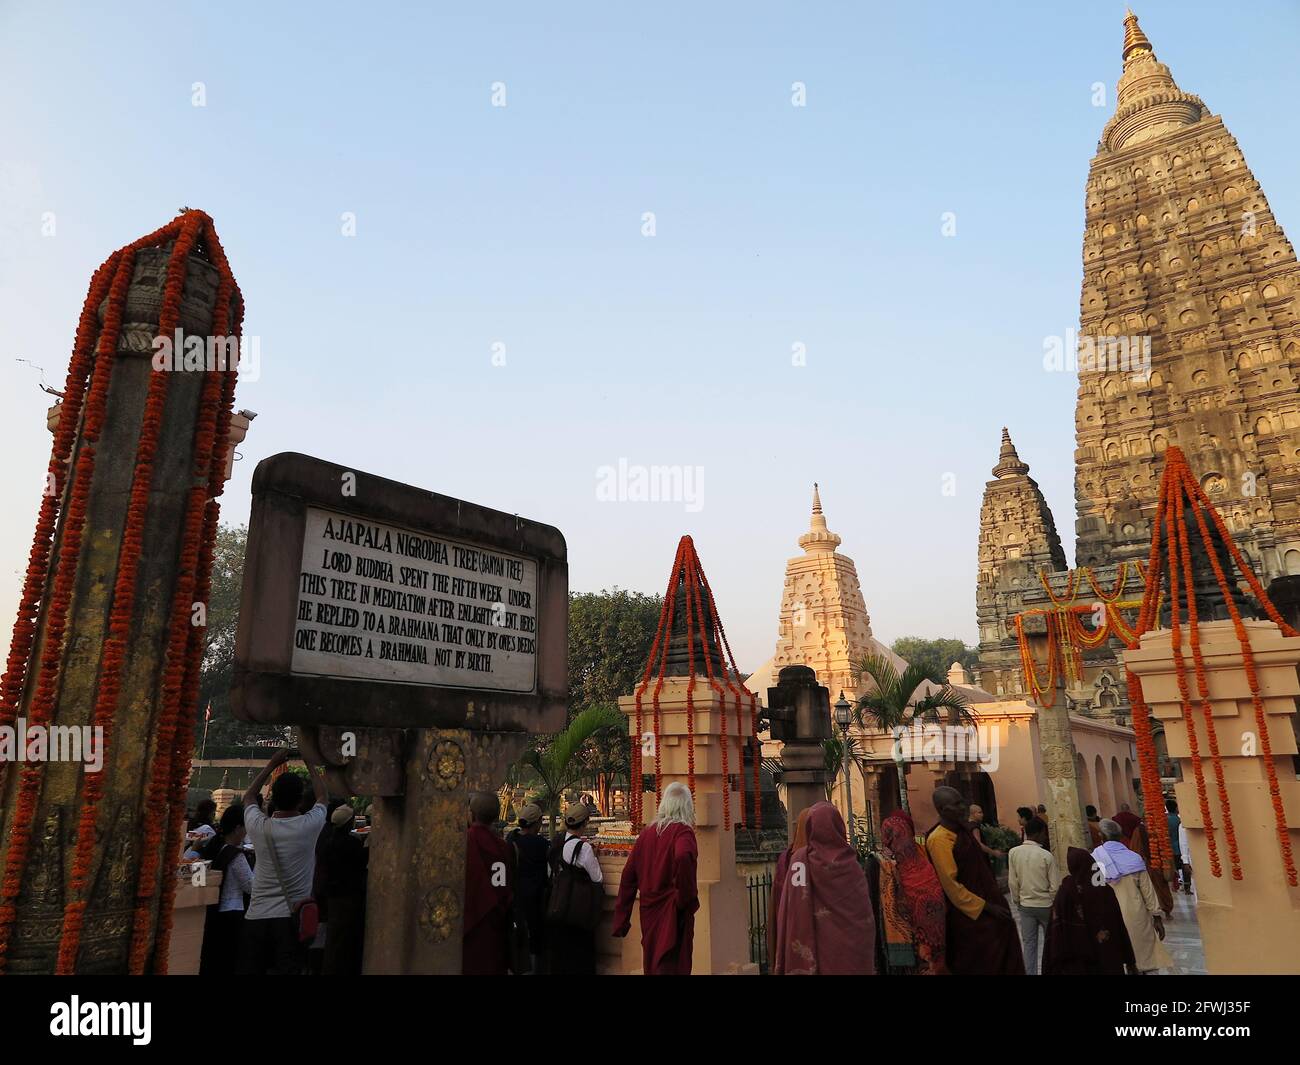 The site of the Ajapala Nigrodha (Banyan) Tree, one of the 7 sacred places in the MahaBodhi Temple complex, Bodhgaya, India, November 2017 Stock Photo